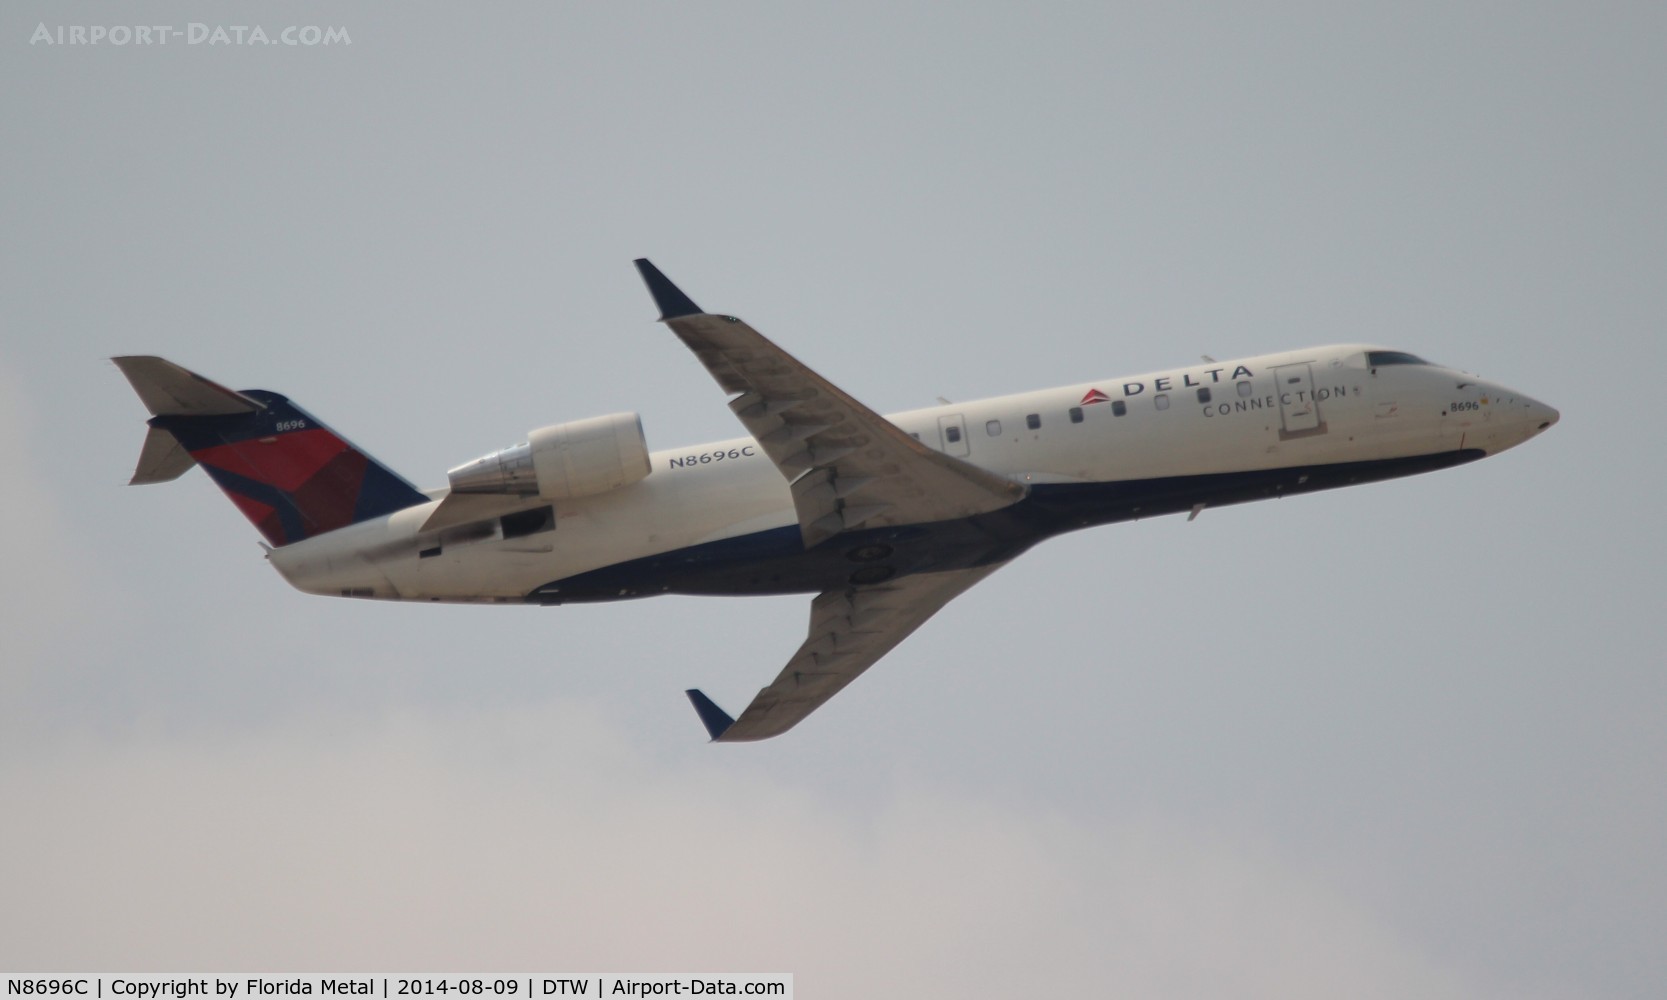 N8696C, 2002 Bombardier CL-600-2B19 (Not found) C/N 7696, Delta Connection